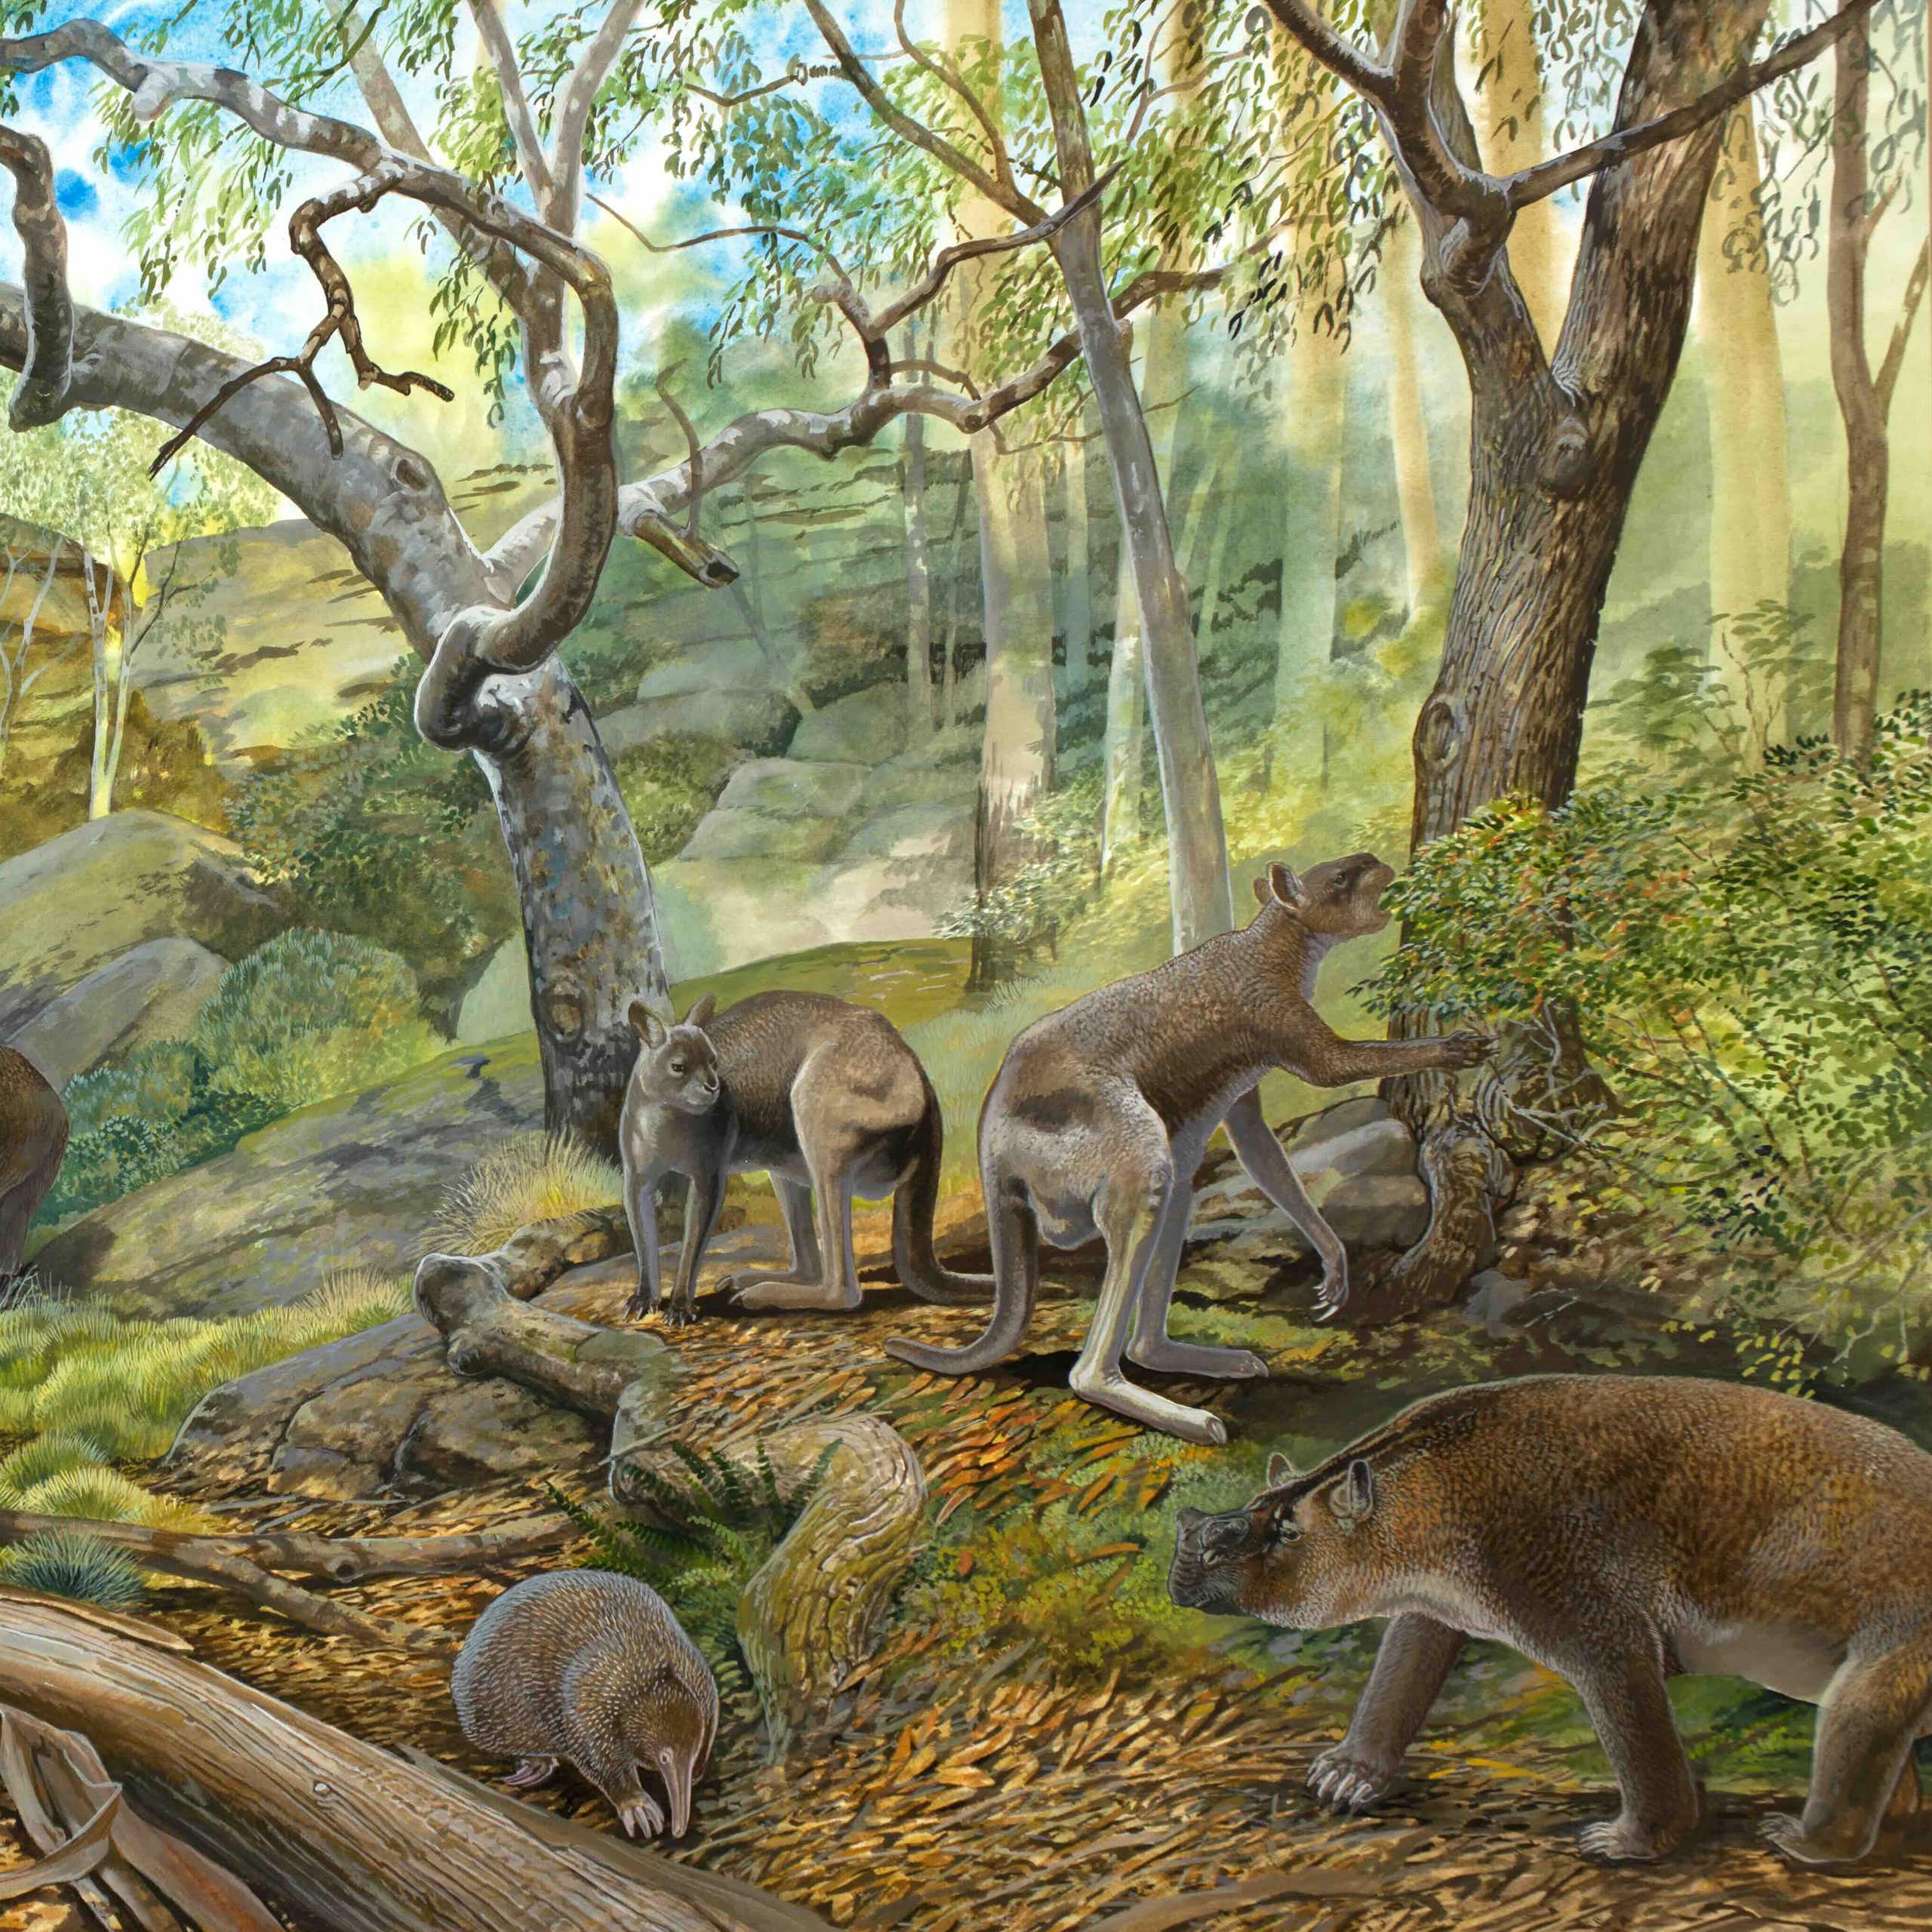 Illustration of a forest landscape populated with a variety of strange marsupials.